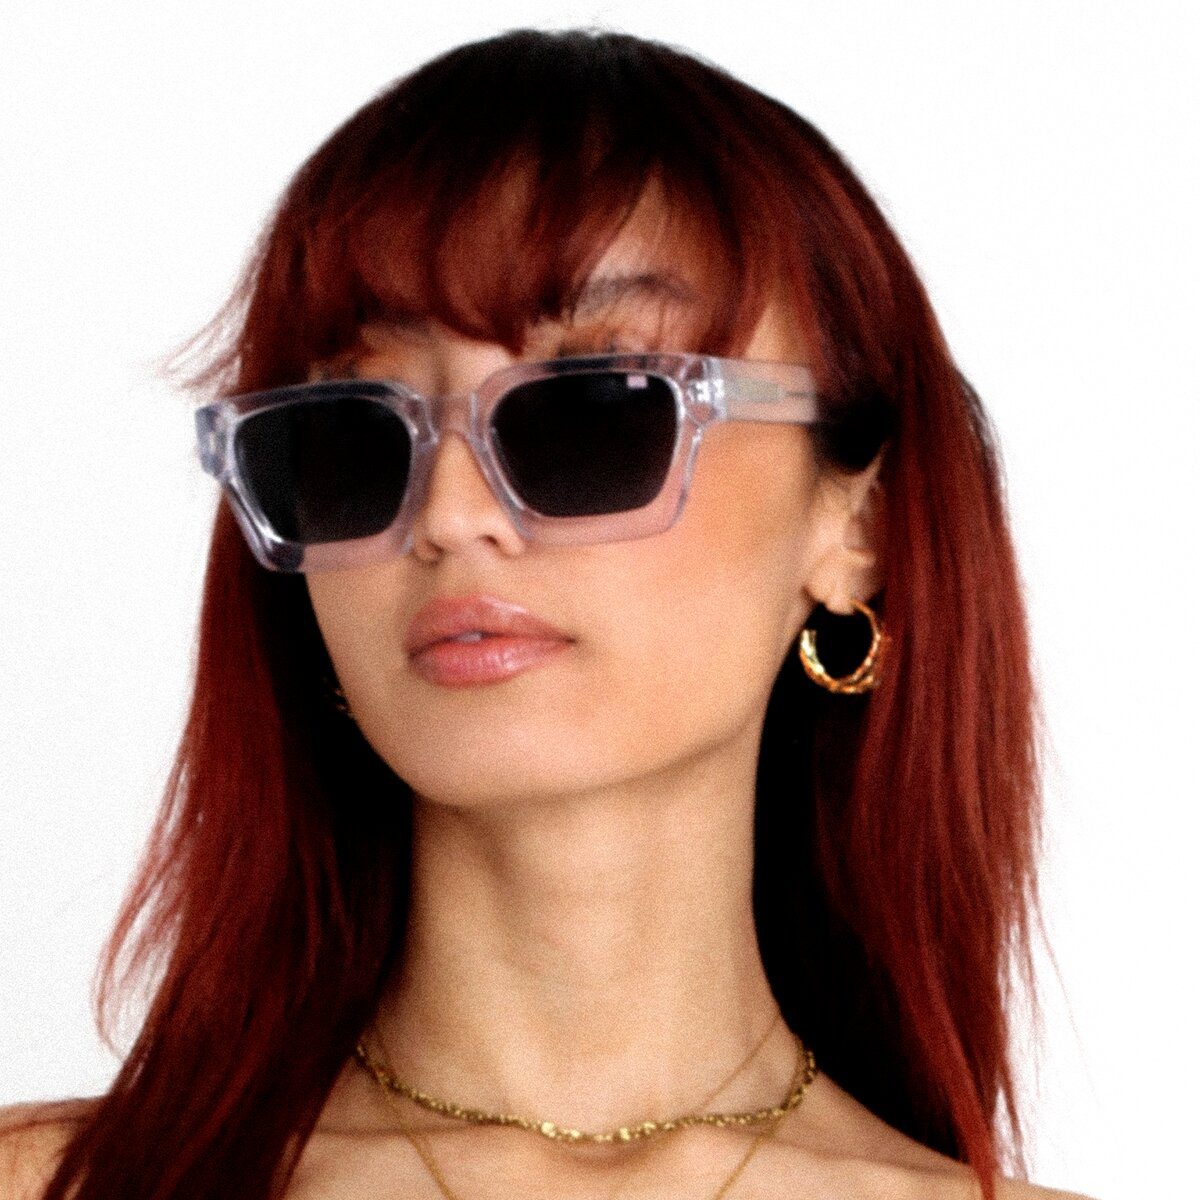 Asian female model wearing Rebel Transparent, luxurious square sunglasses by AKA SAVRAN, inspired by Virgil Abloh and made out of acetate